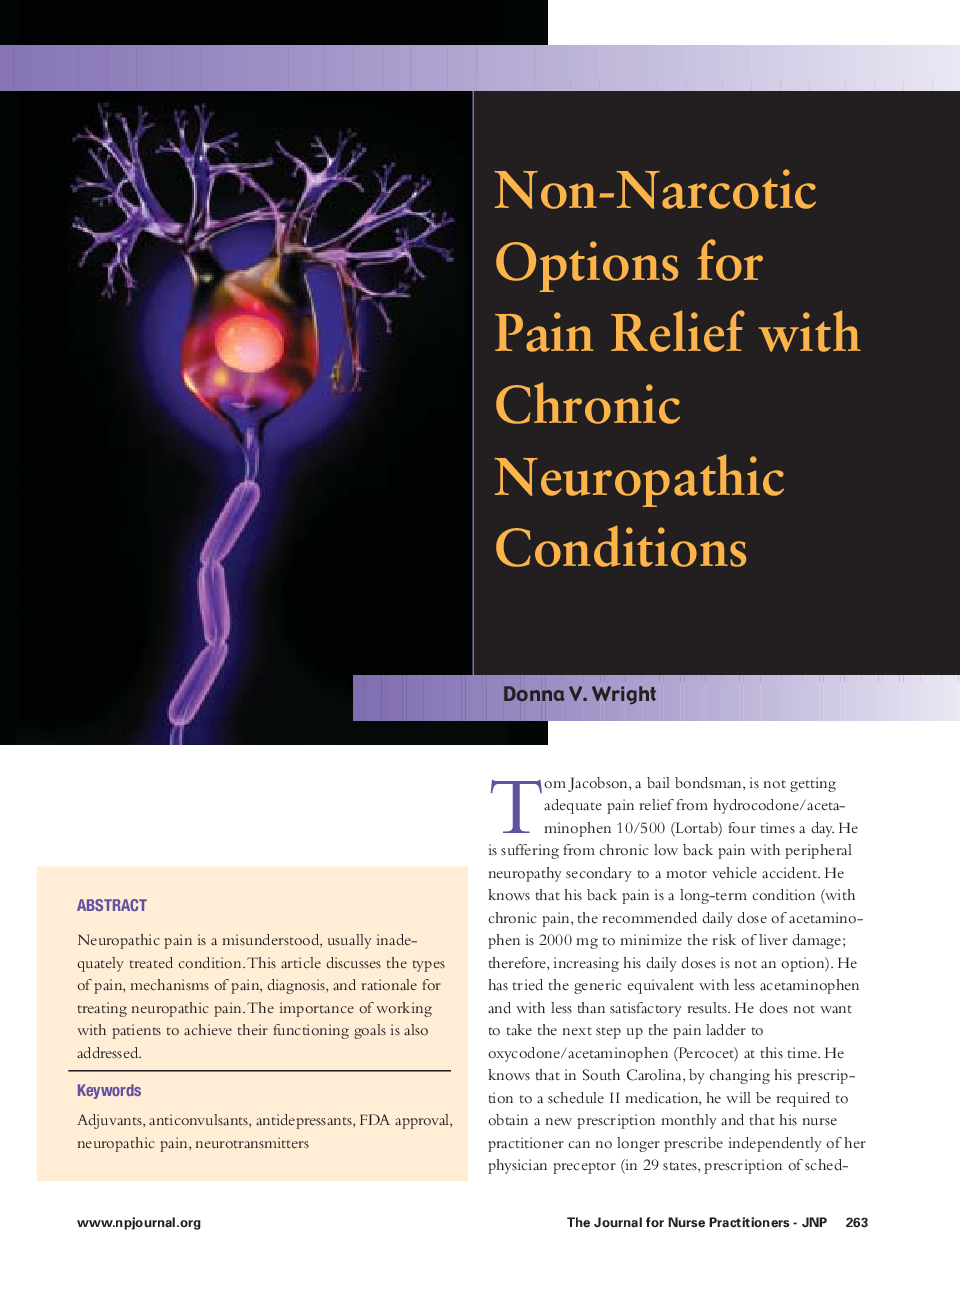 Non-Narcotic Options for Pain Relief with Chronic Neuropathic Conditions